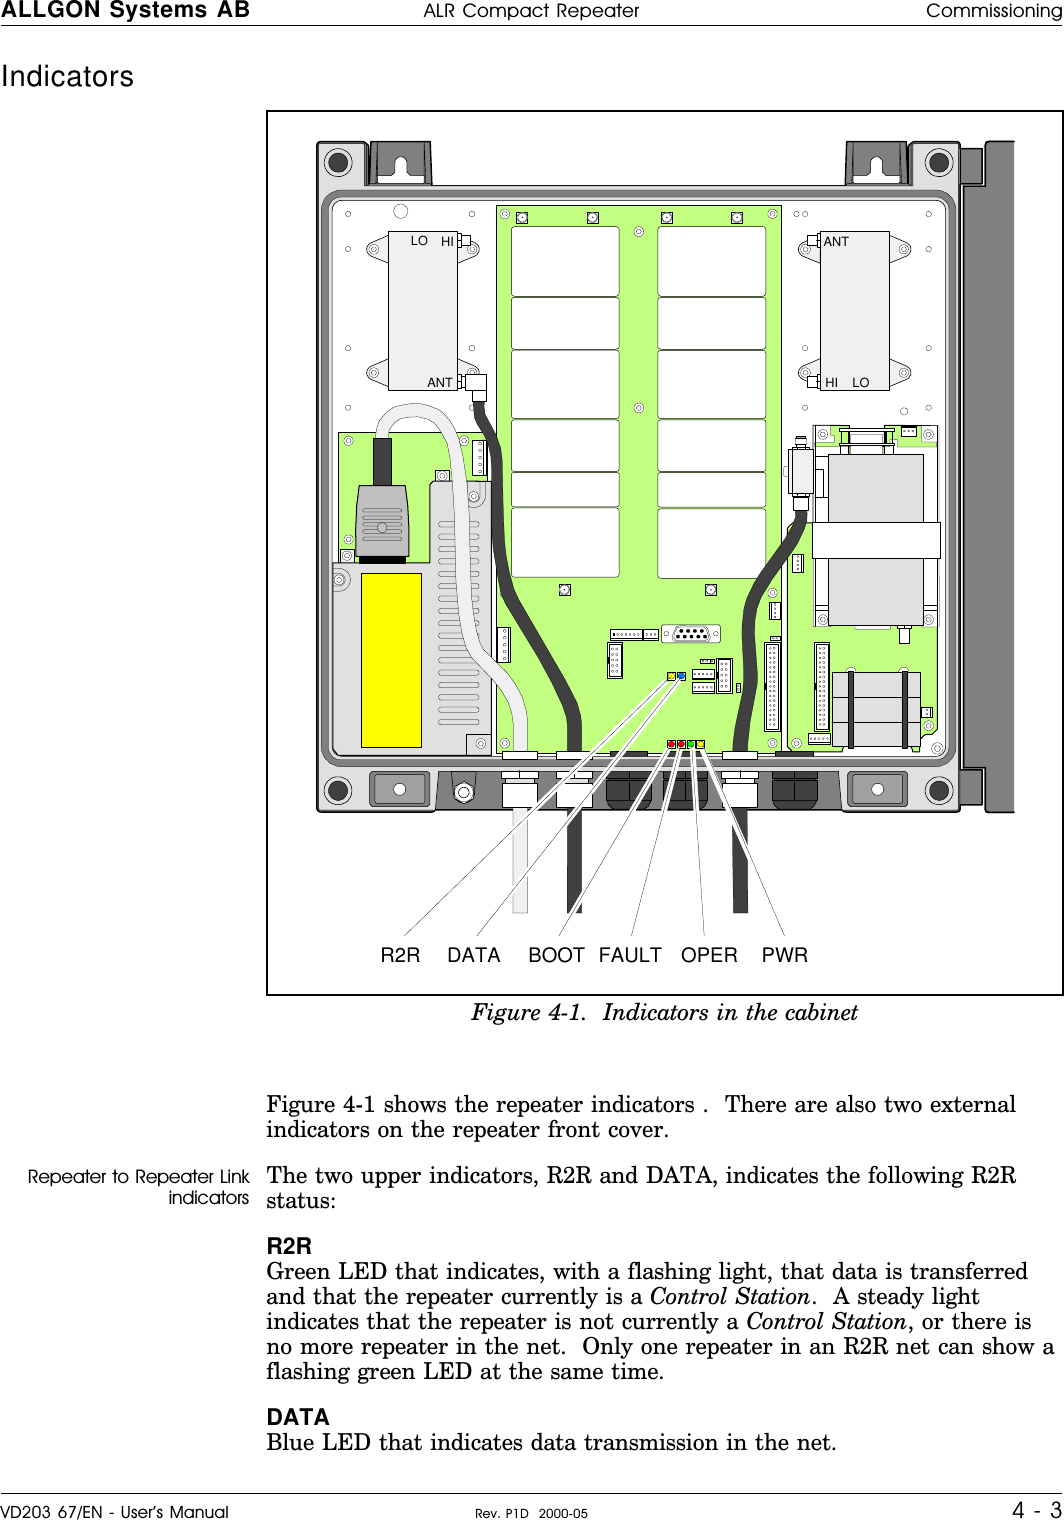 Indicators  Figure 4-1 shows the repeater indicators .  There are also two externalindicators on the repeater front cover.Repeater to Repeater LinkindicatorsThe two upper indicators, R2R and DATA, indicates the following R2Rstatus: R2RGreen LED that indicates, with a flashing light, that data is transferredand that the repeater currently is a Control Station.  A steady lightindicates that the repeater is not currently a Control Station, or there isno more repeater in the net.  Only one repeater in an R2R net can show aflashing green LED at the same time. DATABlue LED that indicates data transmission in the net.ANTHI LOANTLO HIPWRBOOTFAULT OPERR2R DATAFigure 4-1.  Indicators in the cabinetALLGON Systems AB ALR Compact Repeater CommissioningVD203 67/EN - User’s Manual Rev. P1D  2000-05 4 - 3